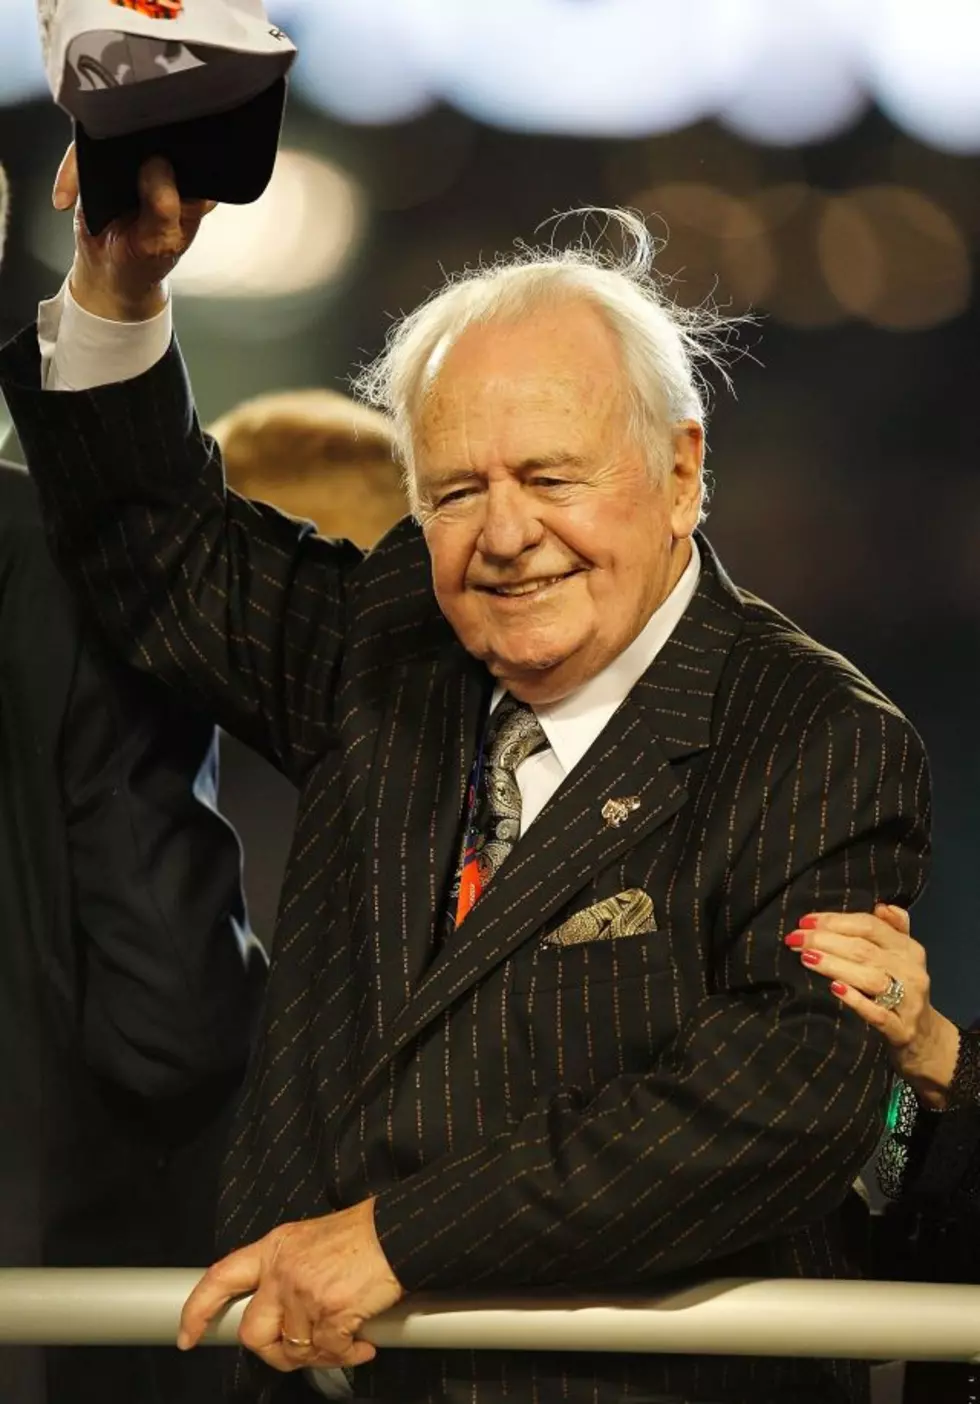 Should Tom Benson Leave His Teams to His Third Wife or Kids? [POLL]